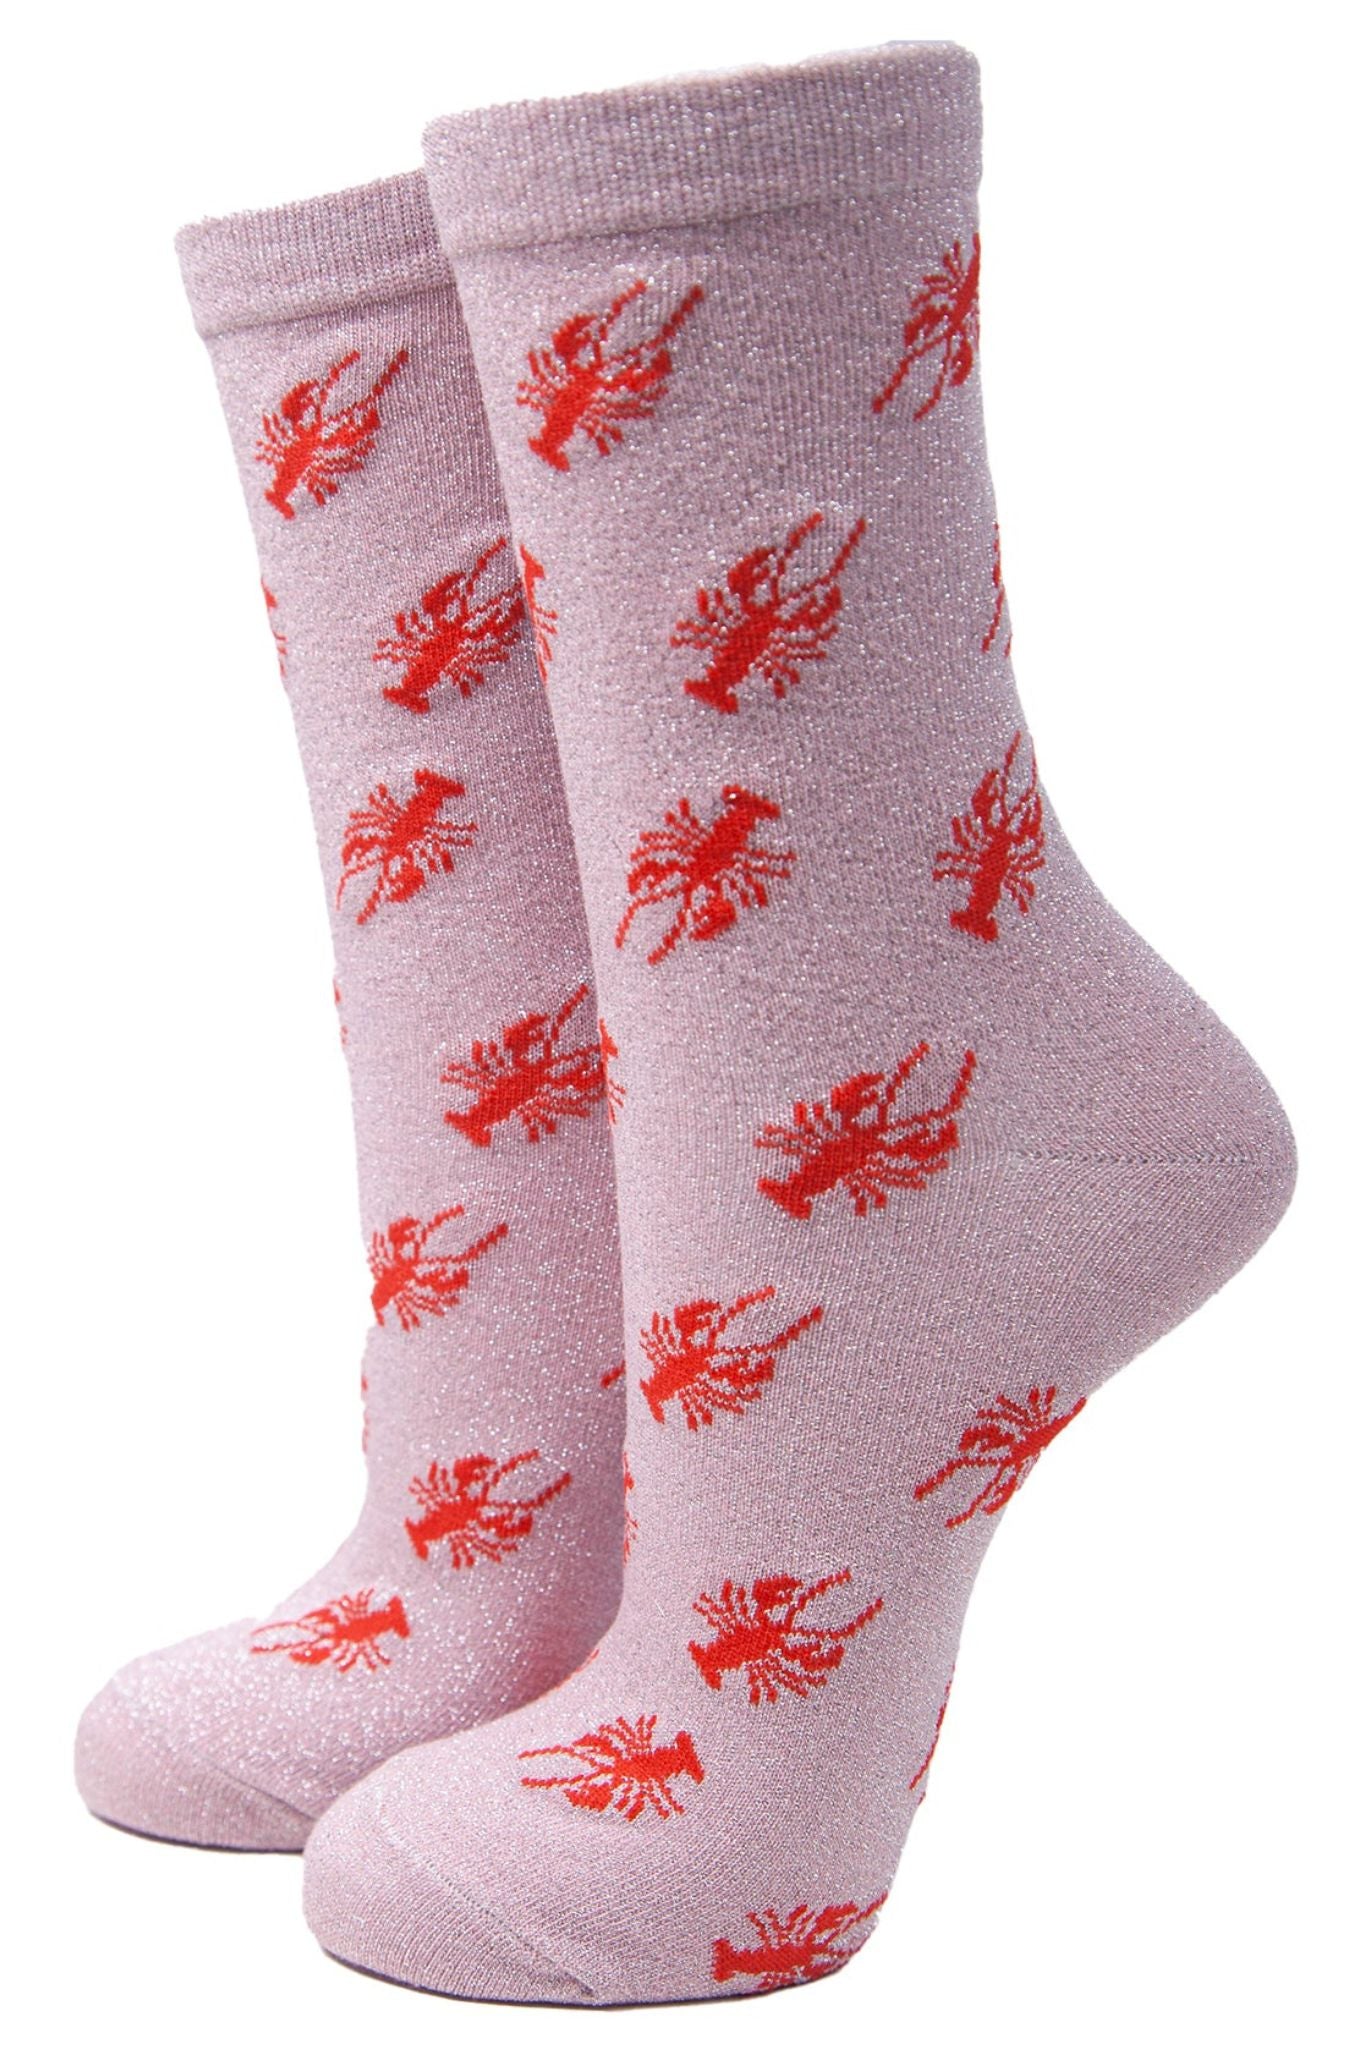 pink ankle socks with red lobster print with an all over silver glitter shimmer